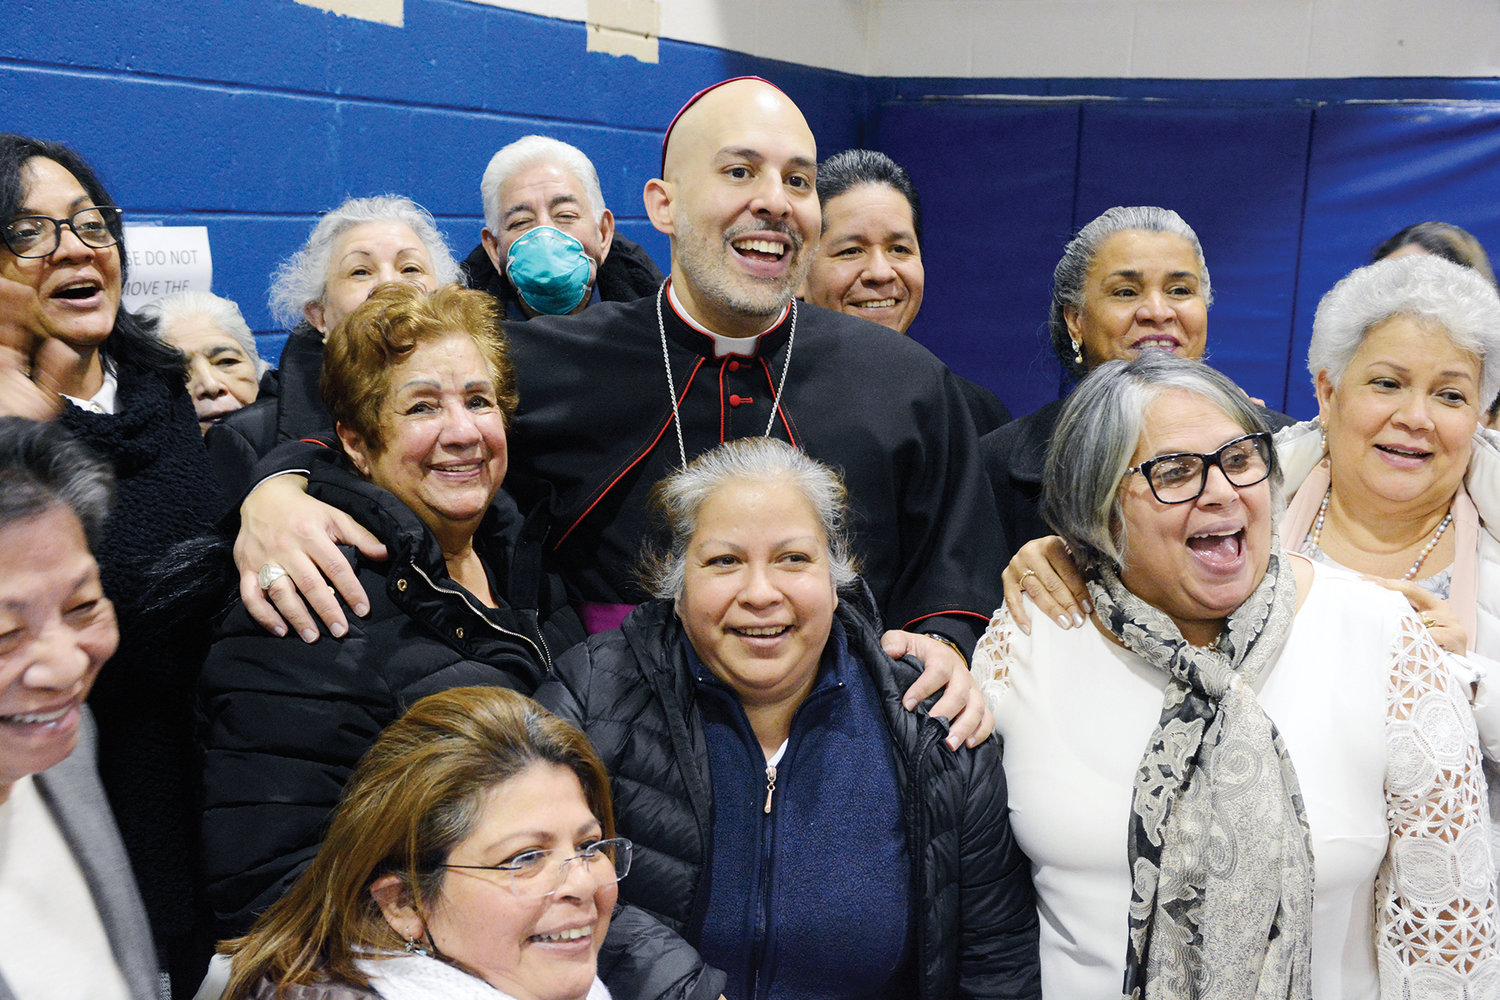 Auxiliary Bishop Joseph Espaillat celebrates his ordination to the episcopacy with those dear to them during a reception at Cathedral High School in the New York Catholic Center in Manhattan following the ordination Mass at St. Patrick’s Cathedral March 1.